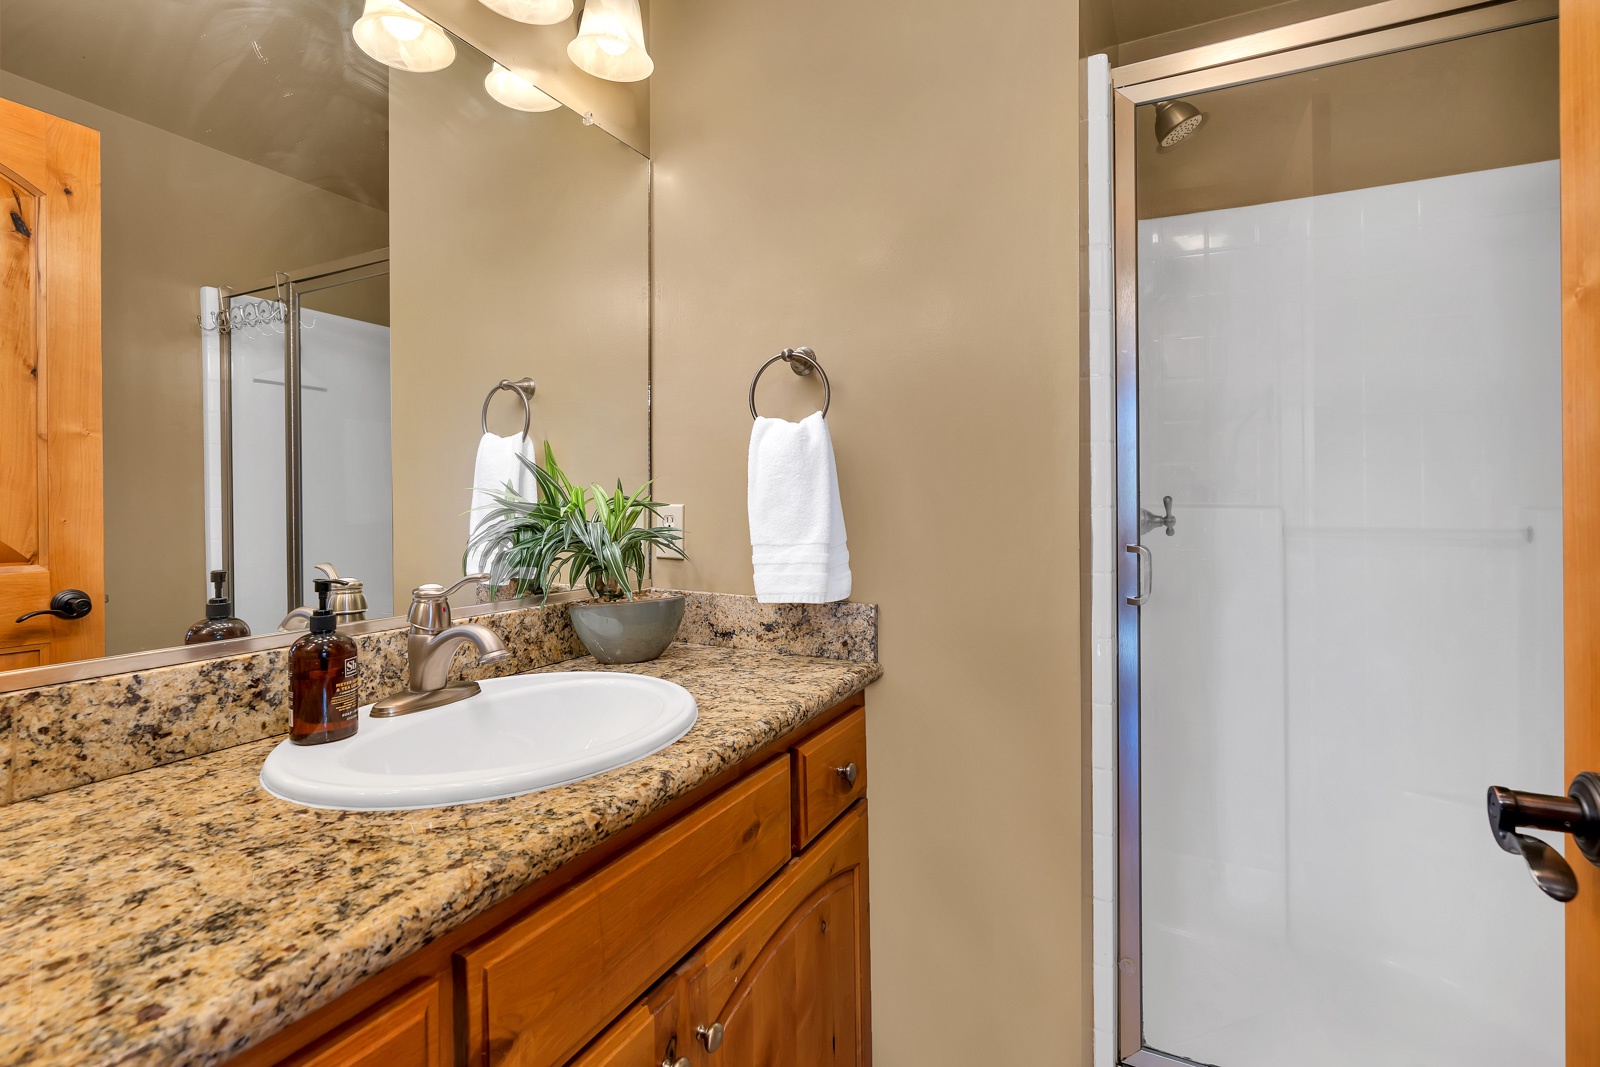 This main-level full bathroom offers guests a spacious single vanity & shower